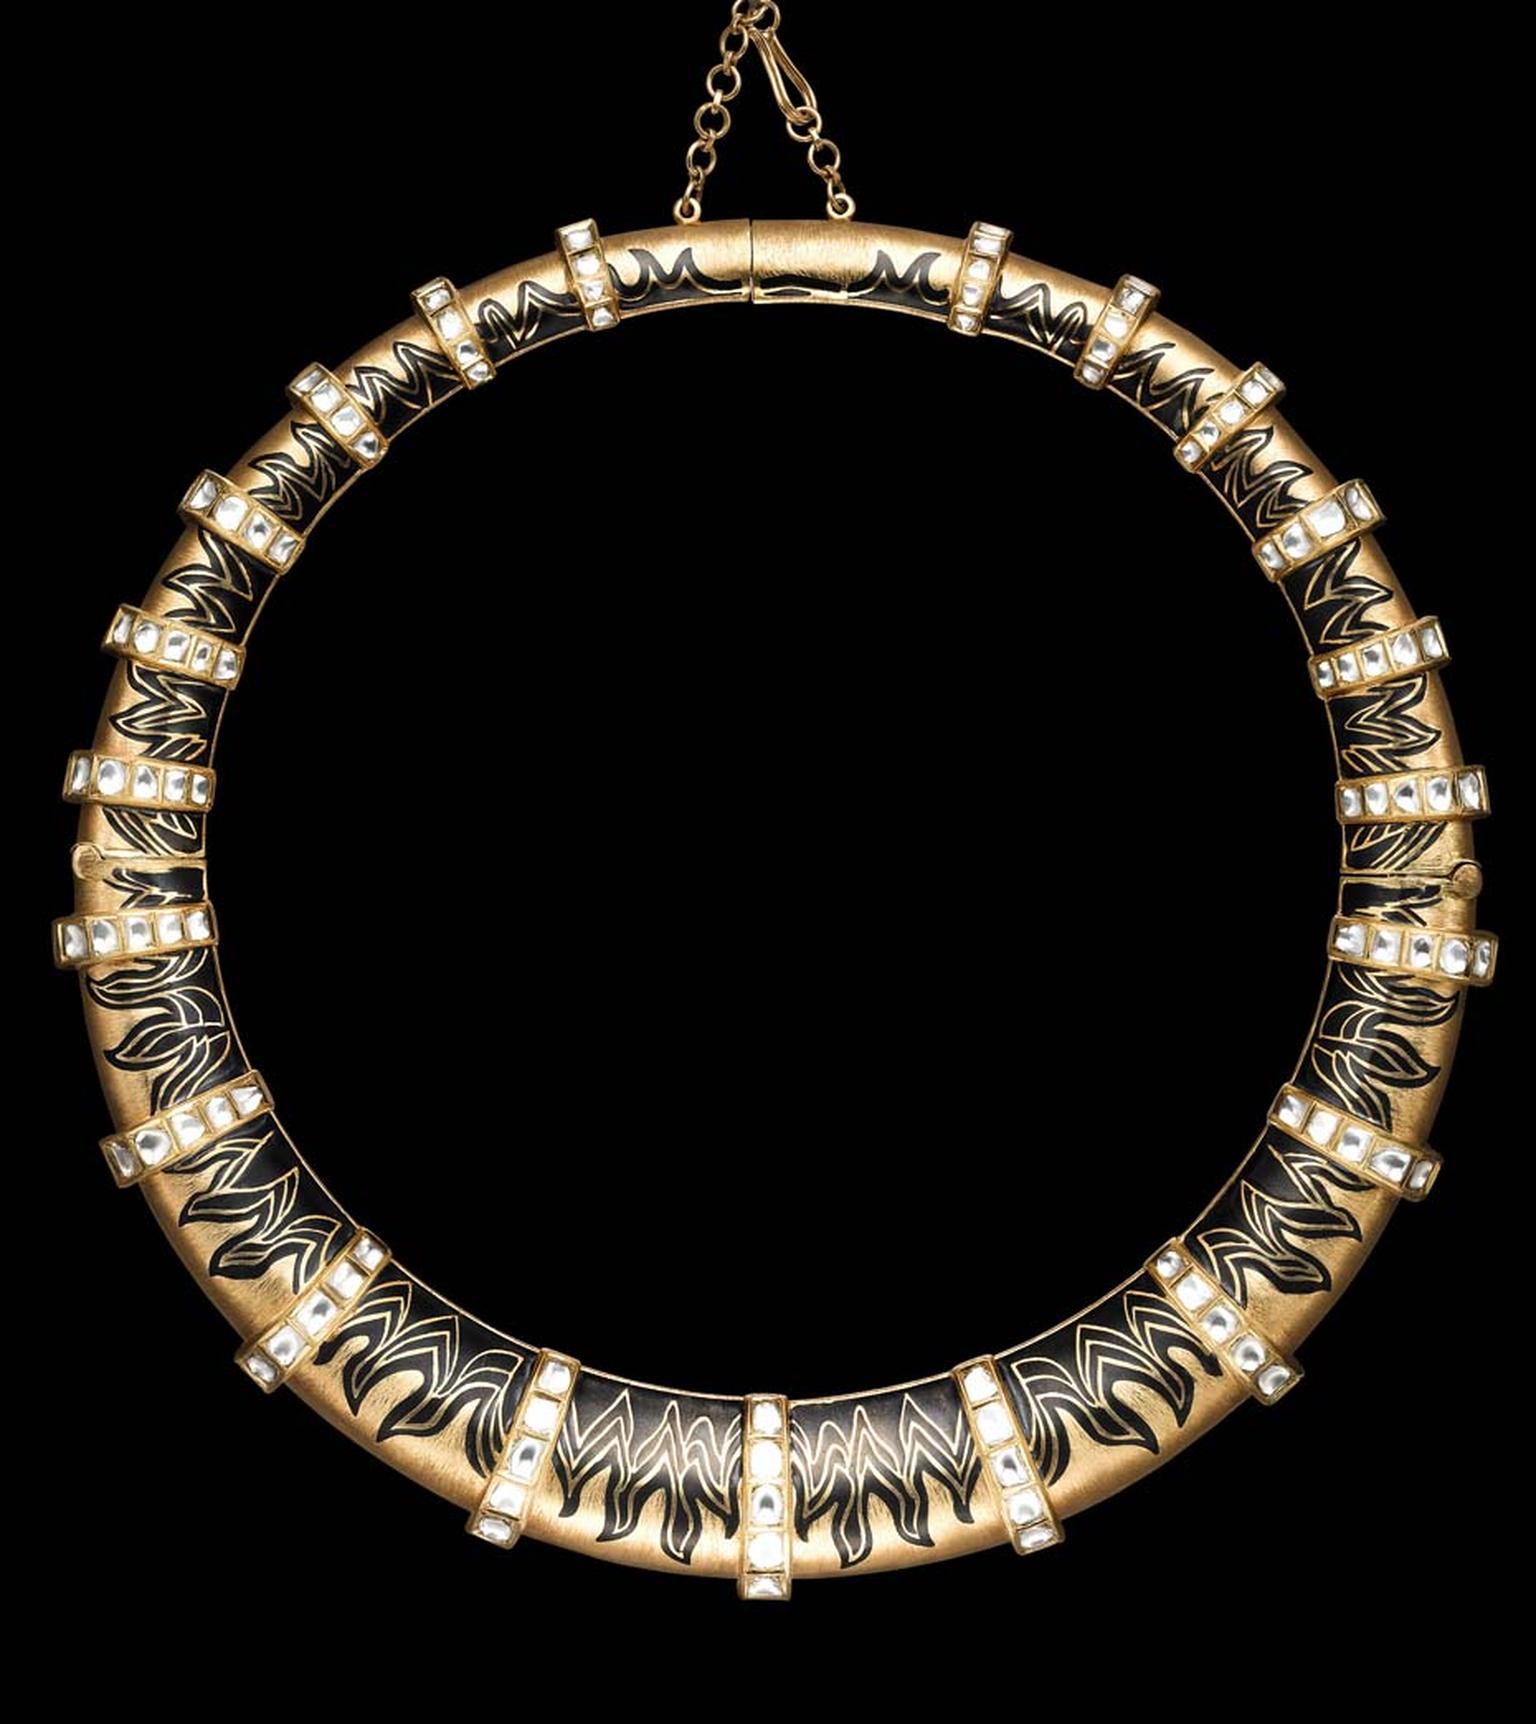 Zoya Fire collection hasli necklace, inspired by the circle of fire, in yellow gold with white polki diamonds and intricate enamelling